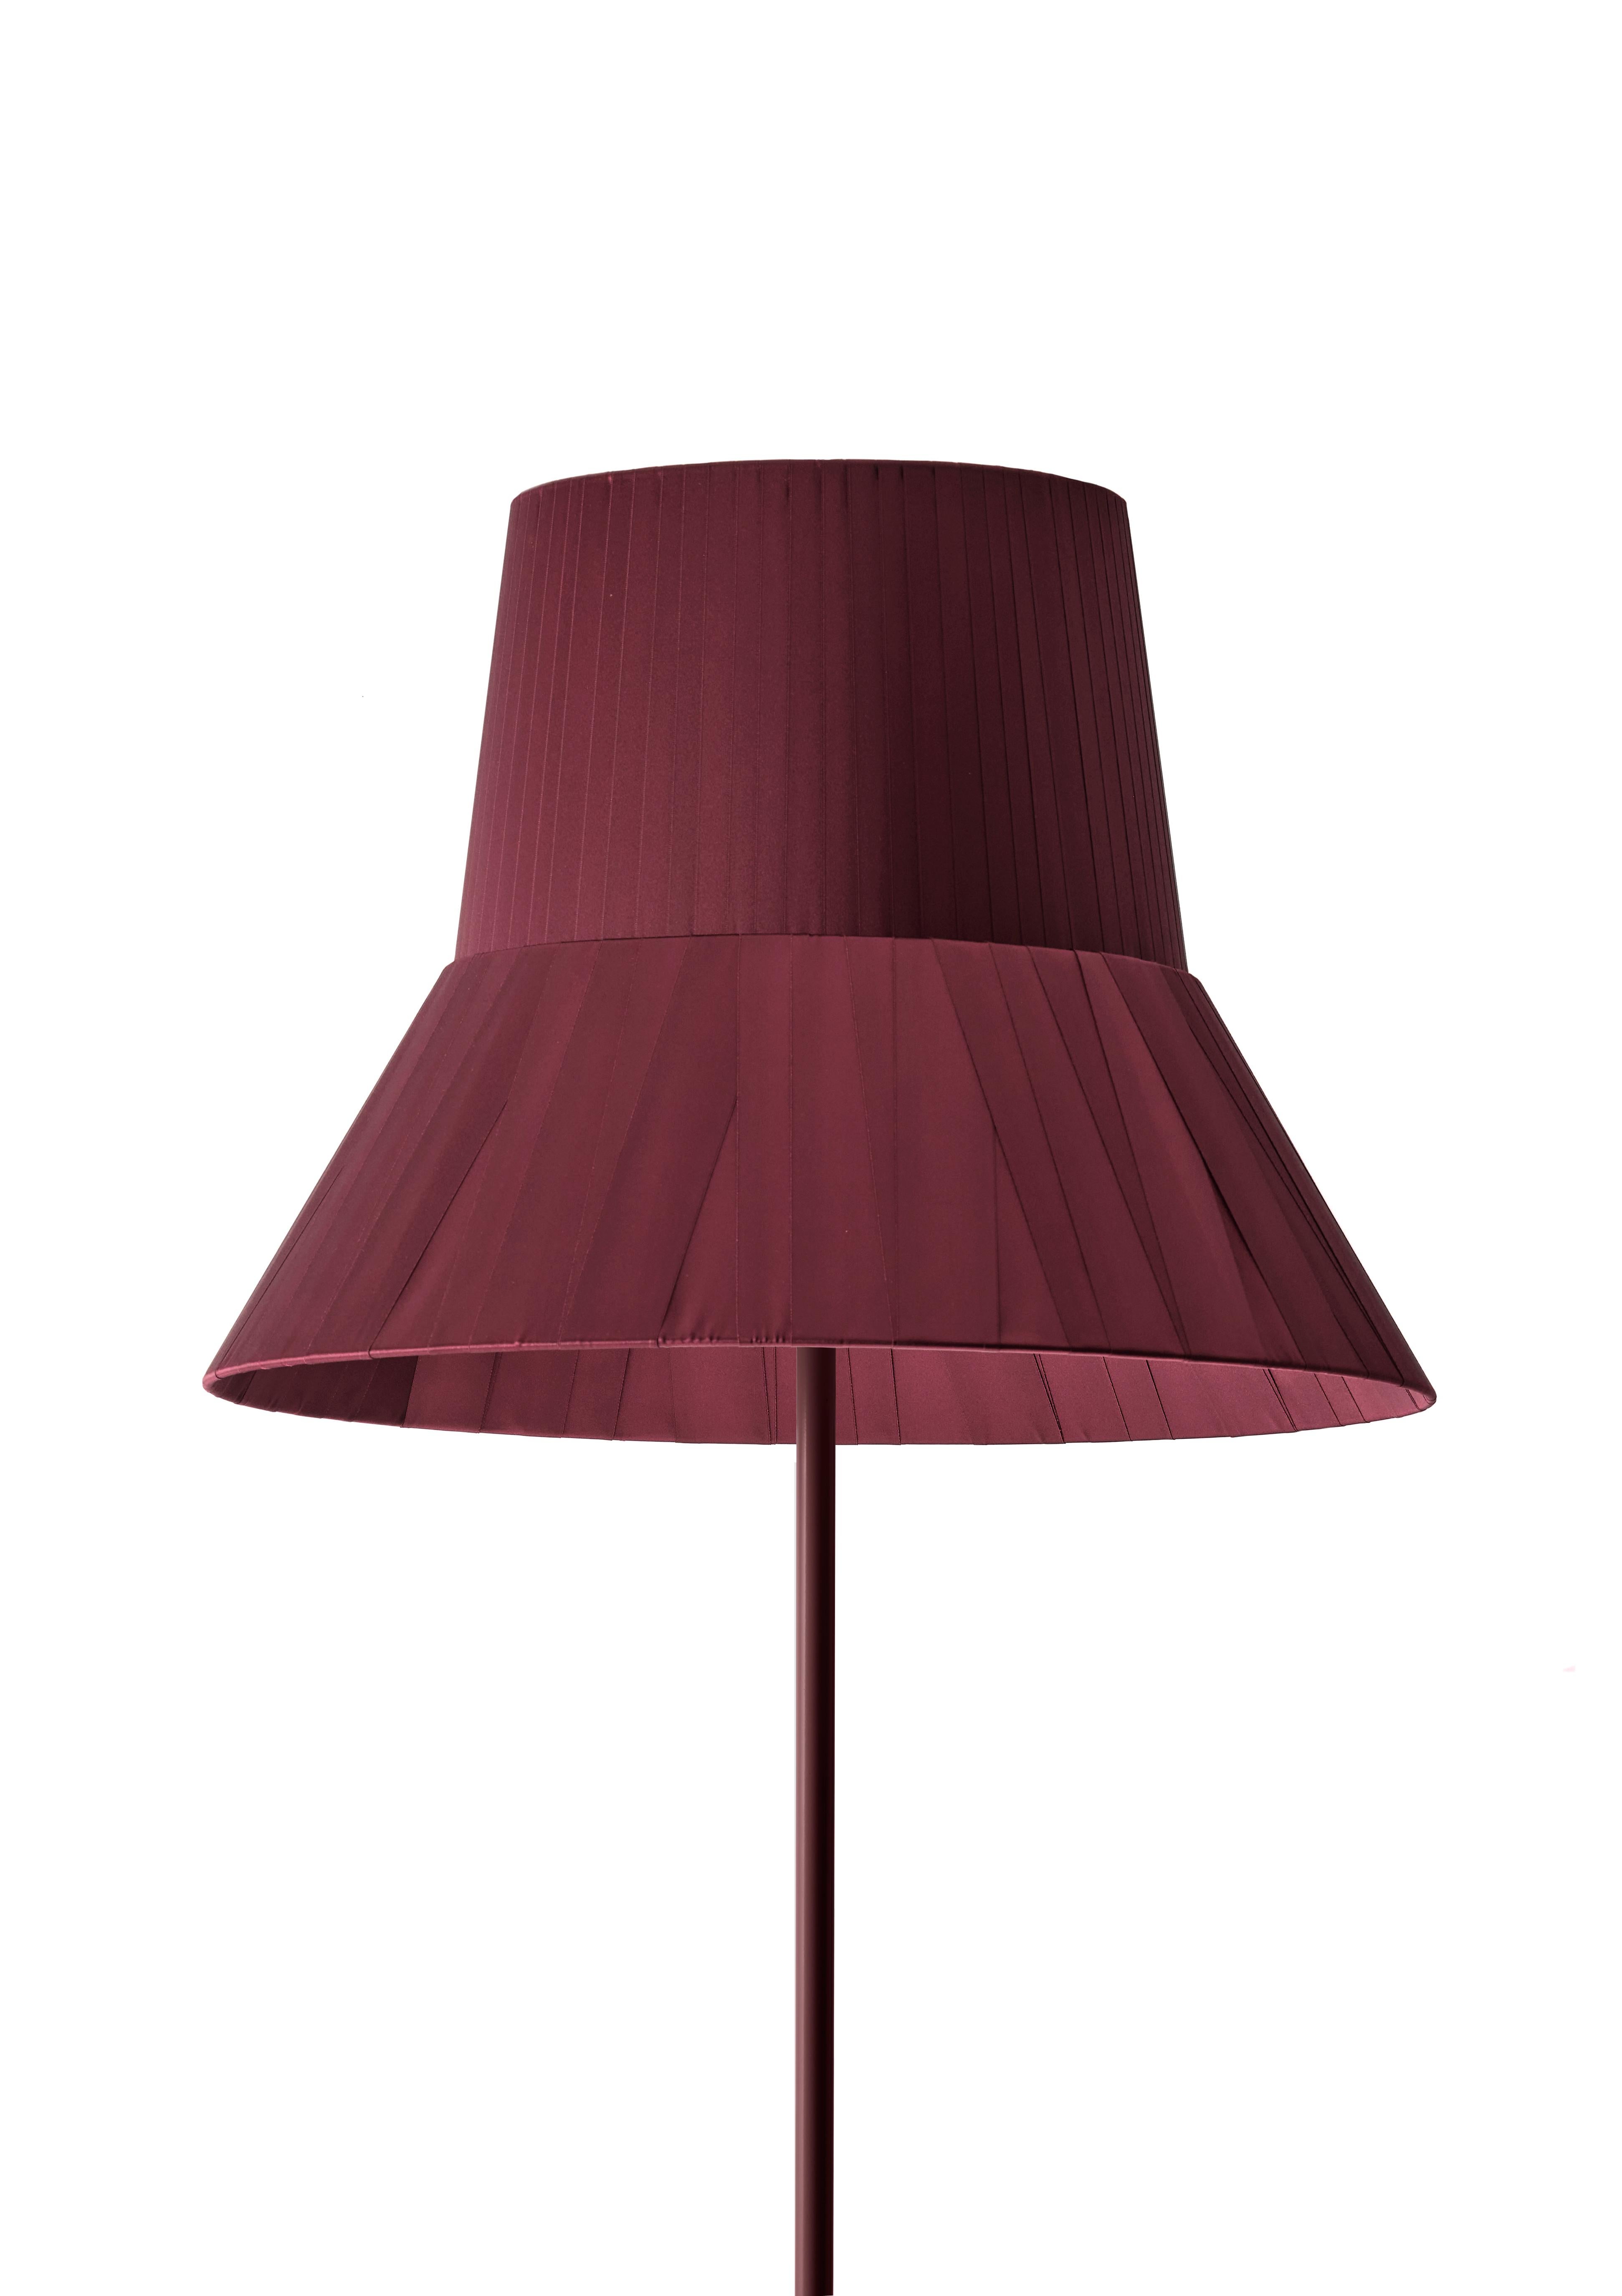 Inspired by an Audrey Hepburn hat, this lamp embodies a certain nostalgia. Nostalgia for an icon of elegance, nostalgia for an enchanting style, nostalgia for a handmade product.
Metal base in powder-coating, satin finish.
Lampshade in 2 parts, top